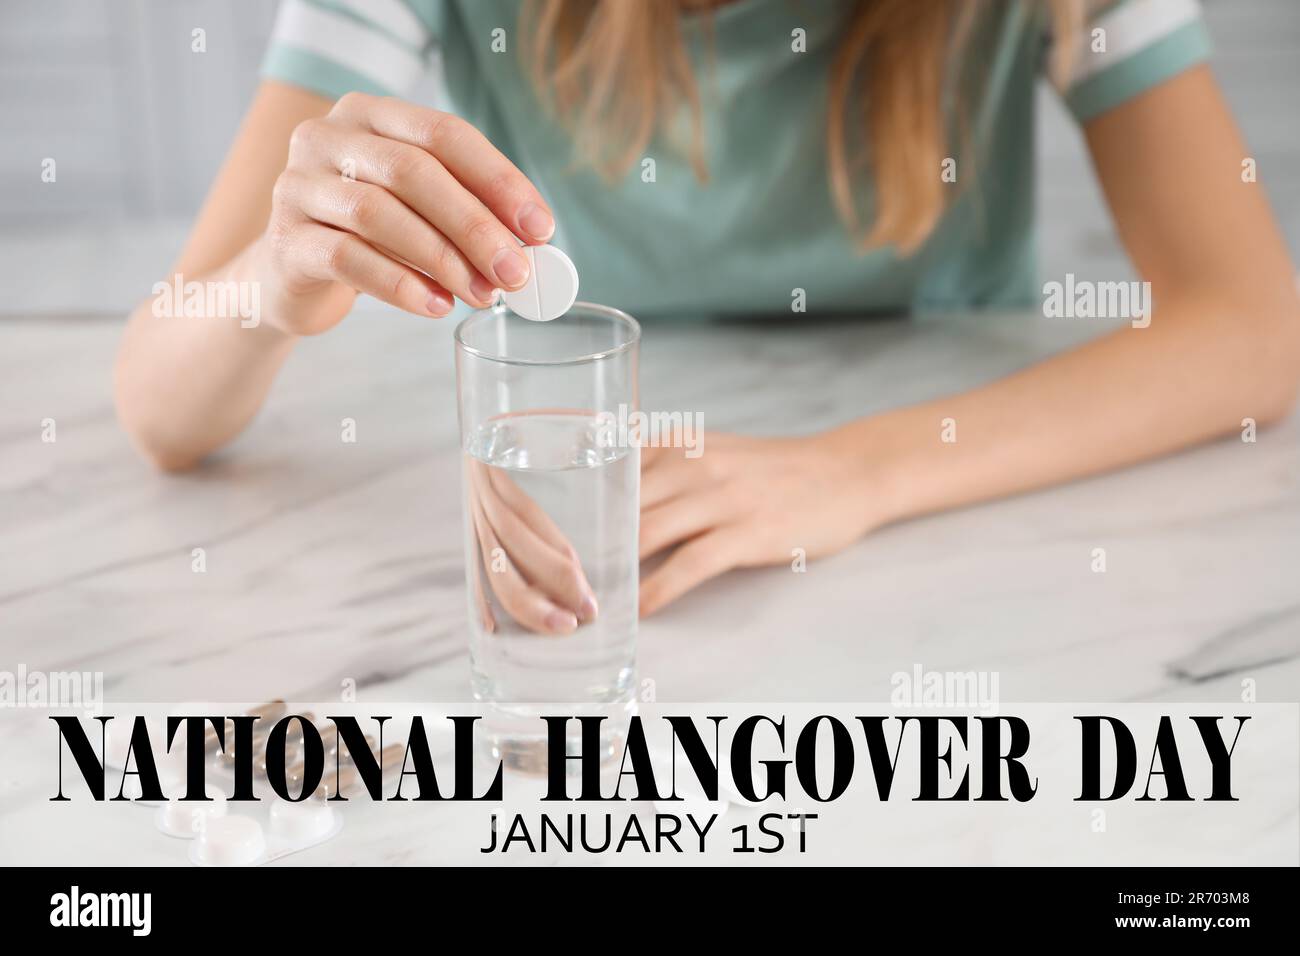 National hangover day - January 1st. Woman taking remedy to relieve effects of alcohol consumption at table, closeup Stock Photo